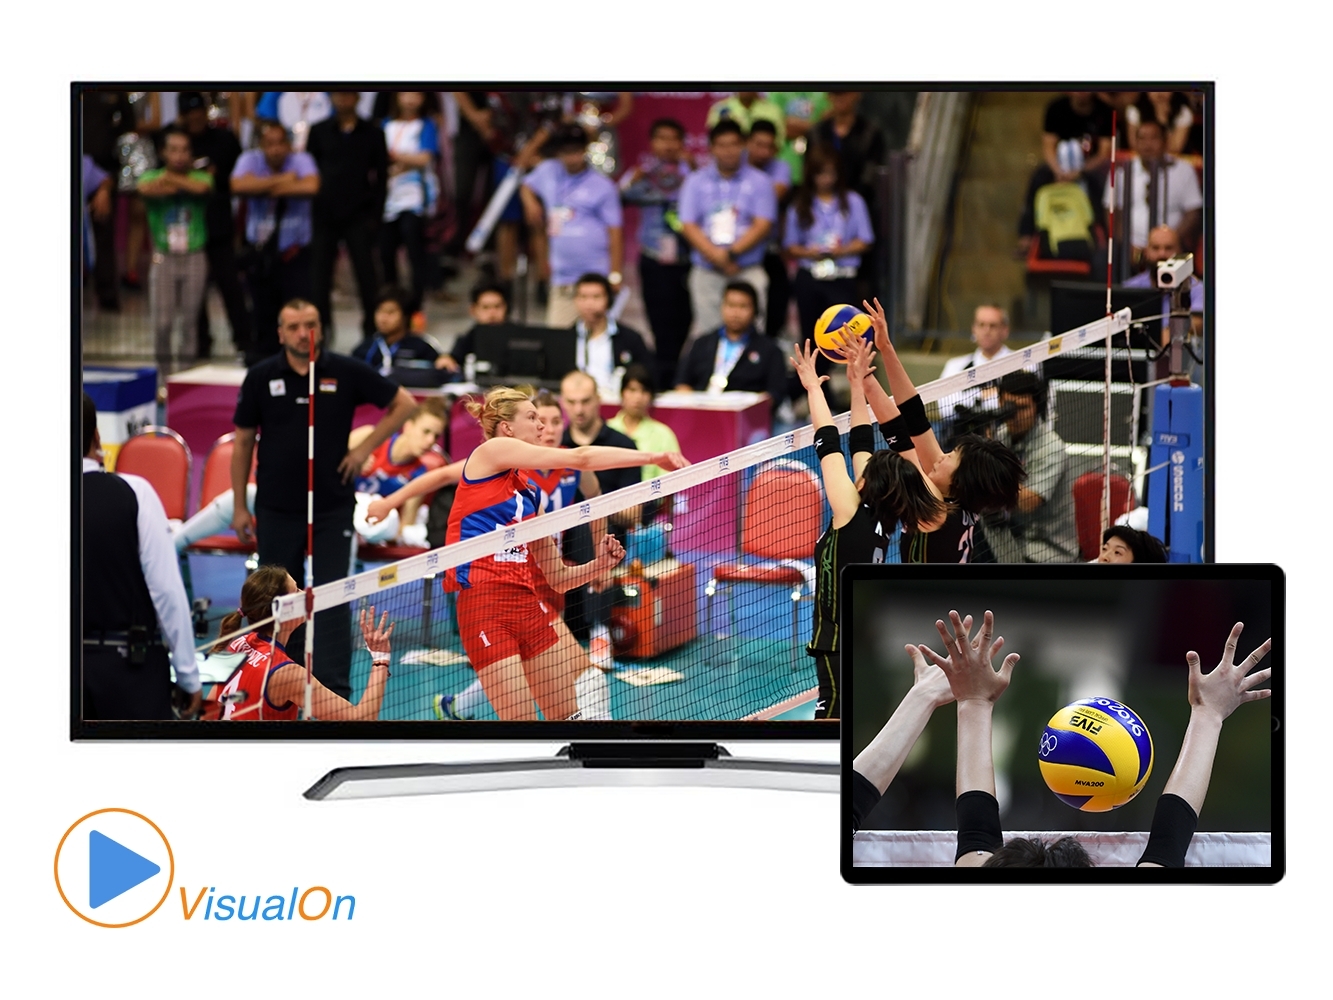 VisualOn Partners With KDDI to Stream the FIVB Volleyball World Cup Japan 2019 Broadcast by Fuji Television, Pioneering the Use of Ultra Low Latency CMAF and Multiple Camera Angles for Live Sports